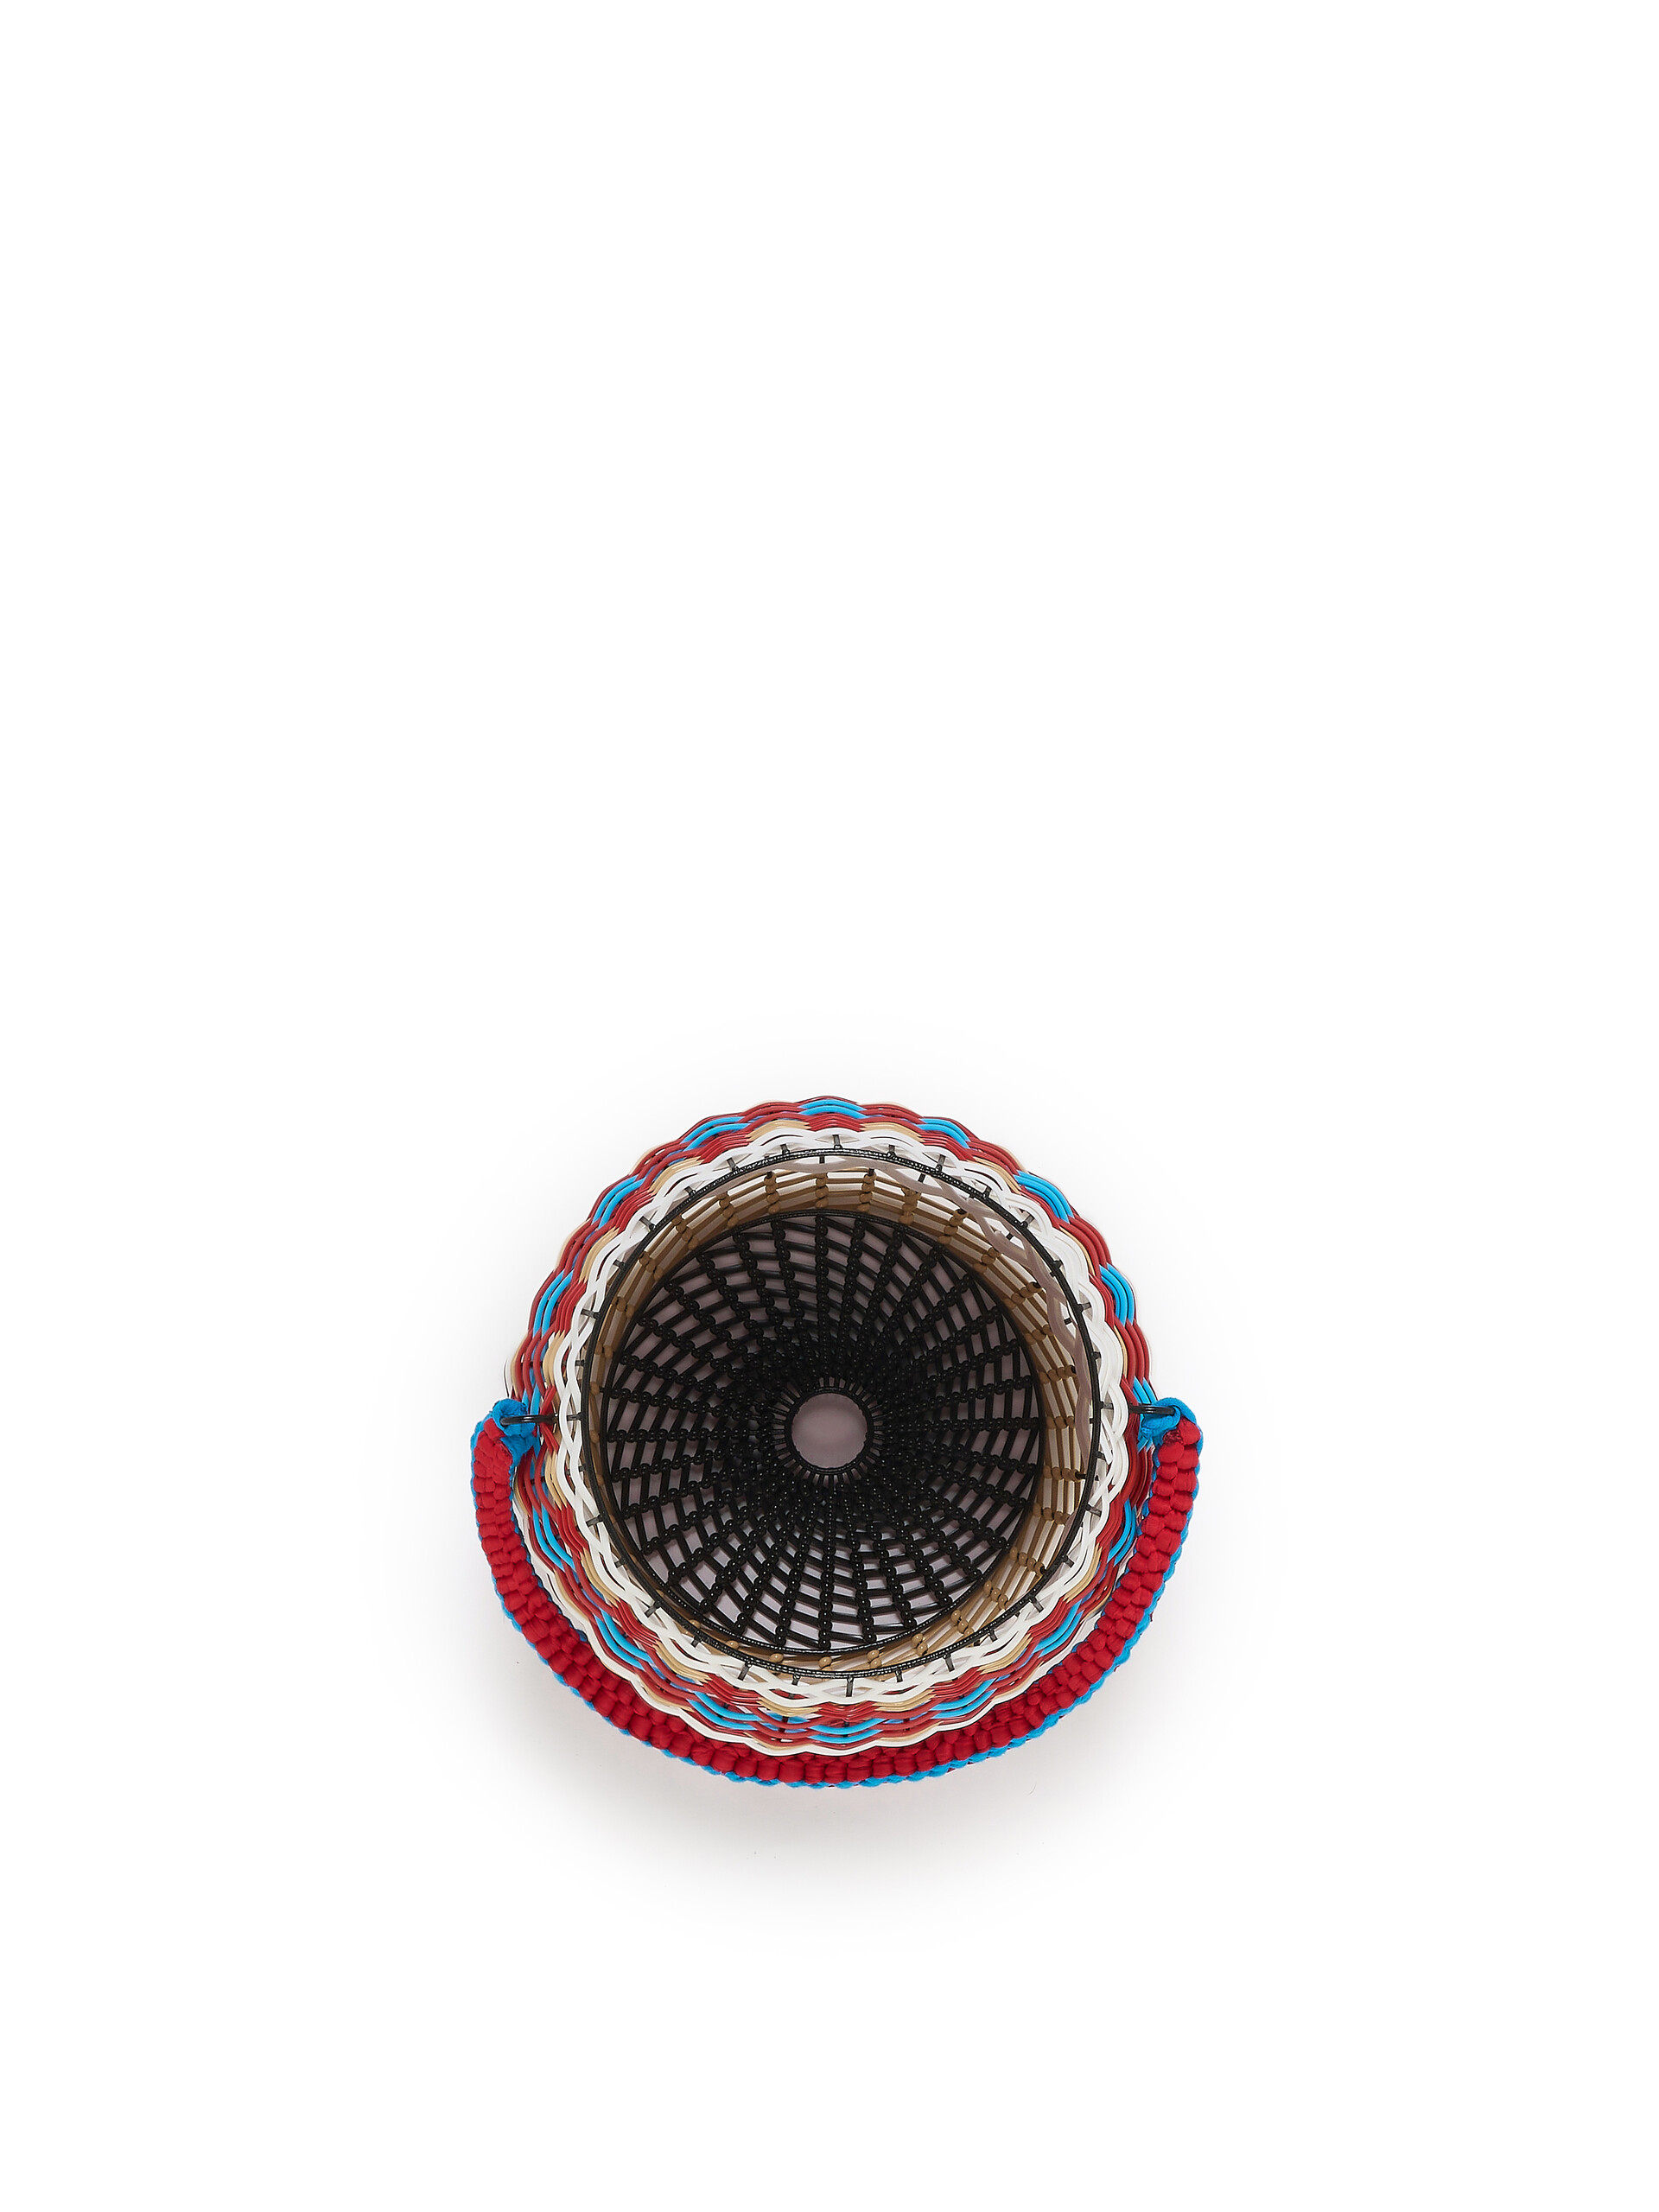 Red and white MARNI MARKET woven cable basket - Accessories - Image 4